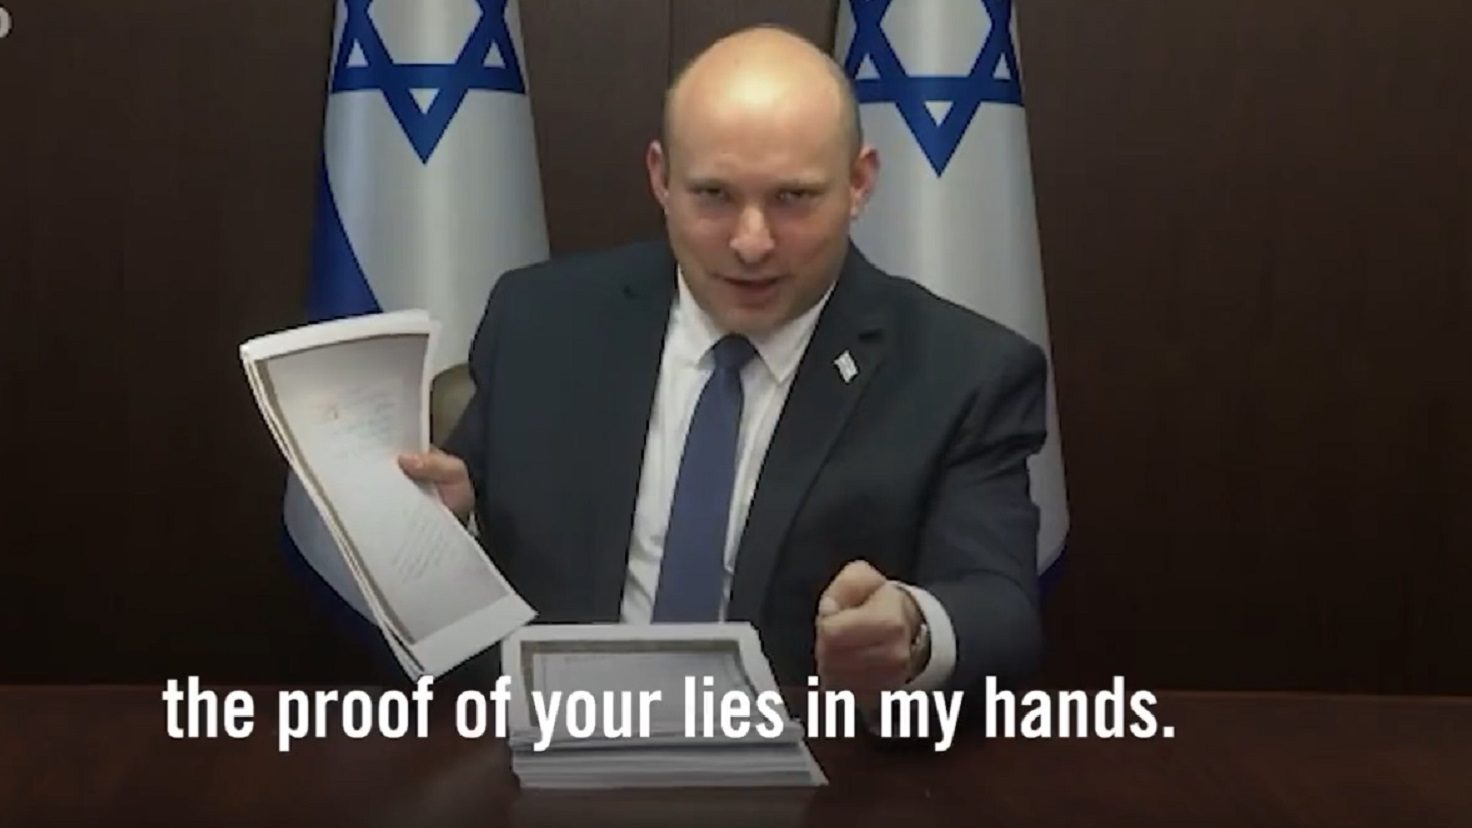 Bennett Releases Nuclear Documents Stolen From Iran That Show It Spied on IAEA